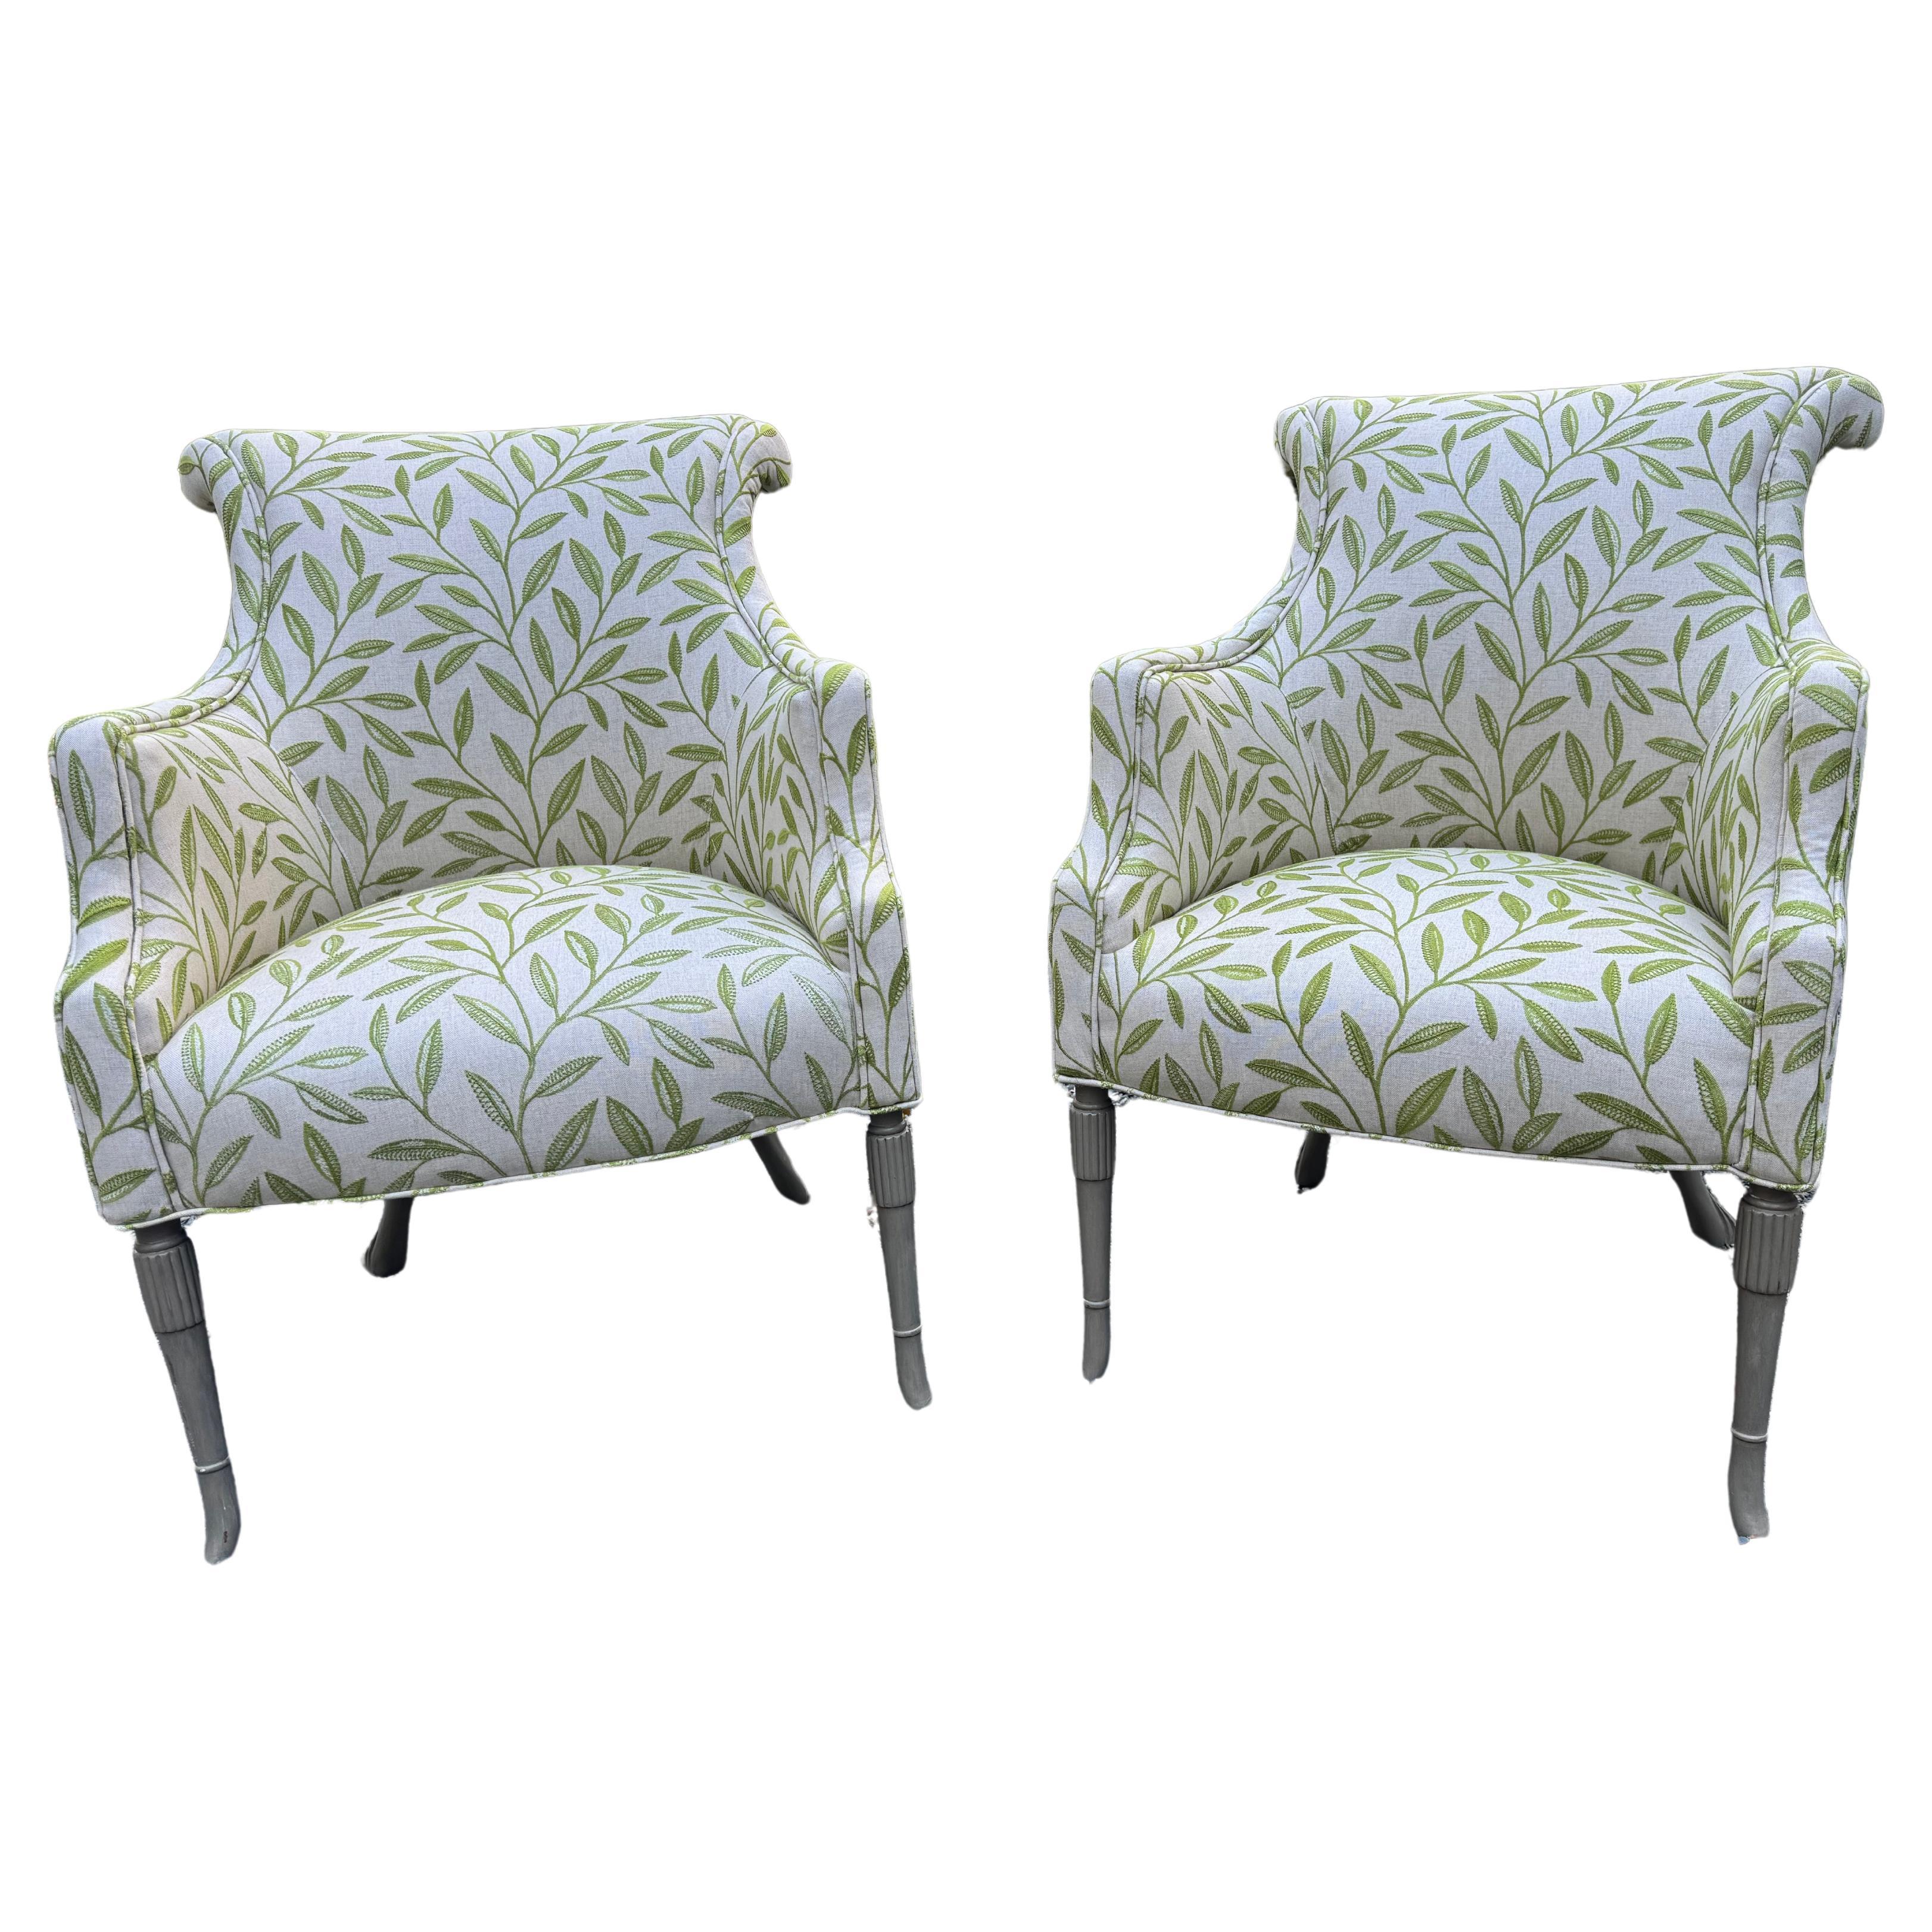 Sophisticated Pair of Leaf Motif Upholstered Club Chairs